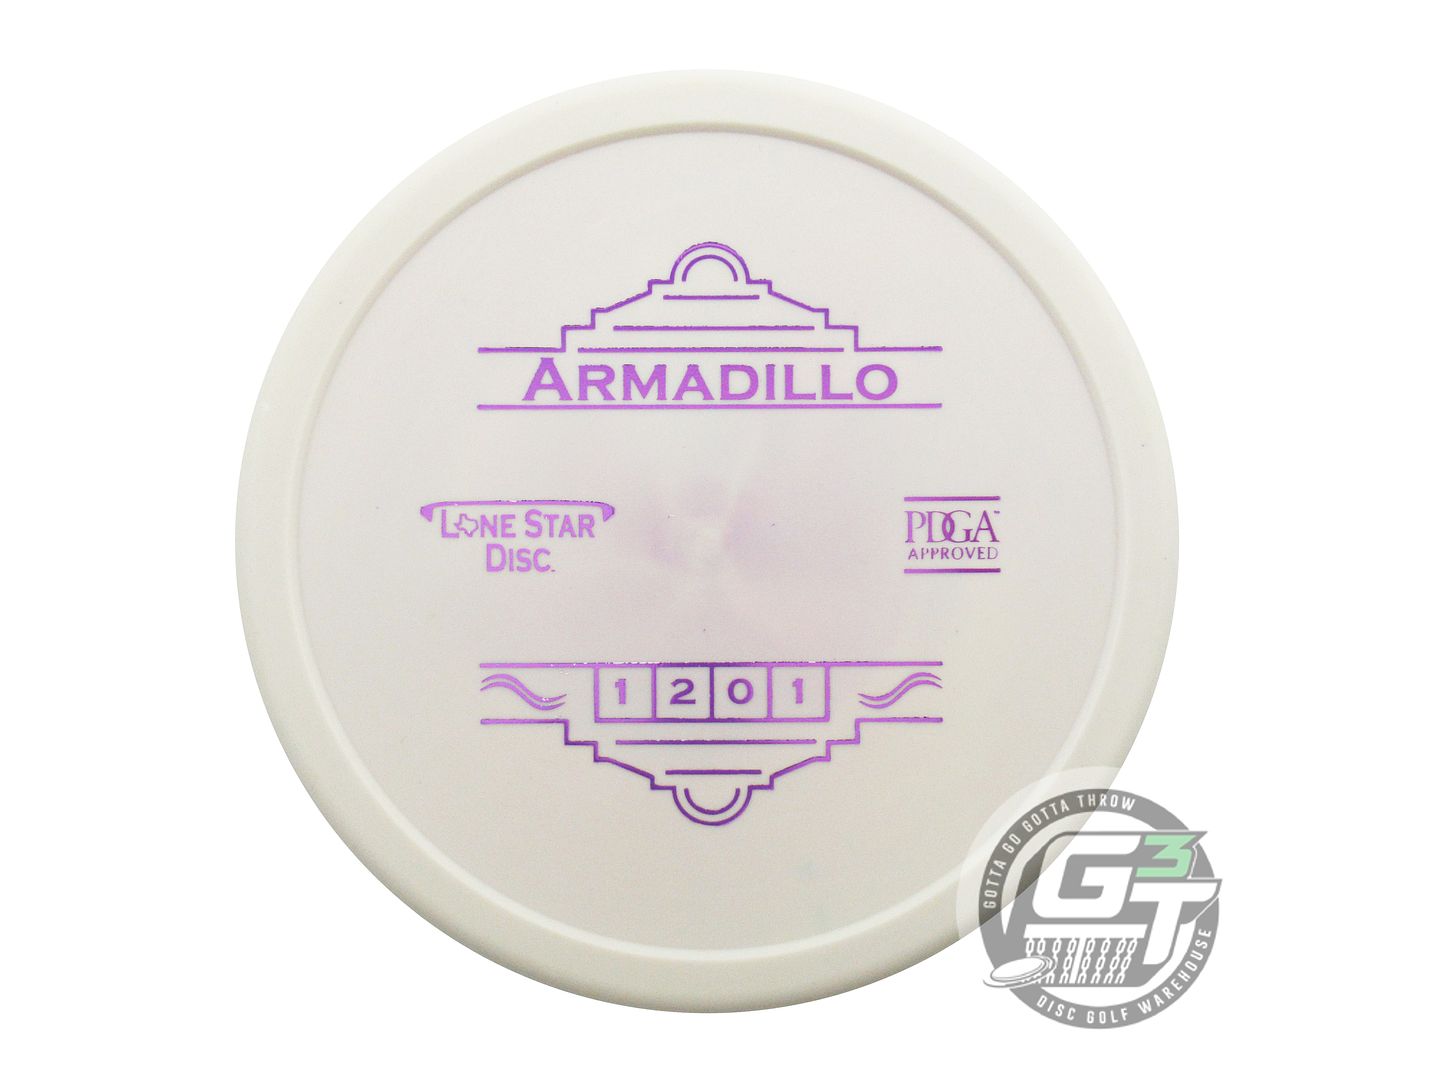 Lone Star Victor 2 Armadillo Putter Golf Disc (Individually Listed)